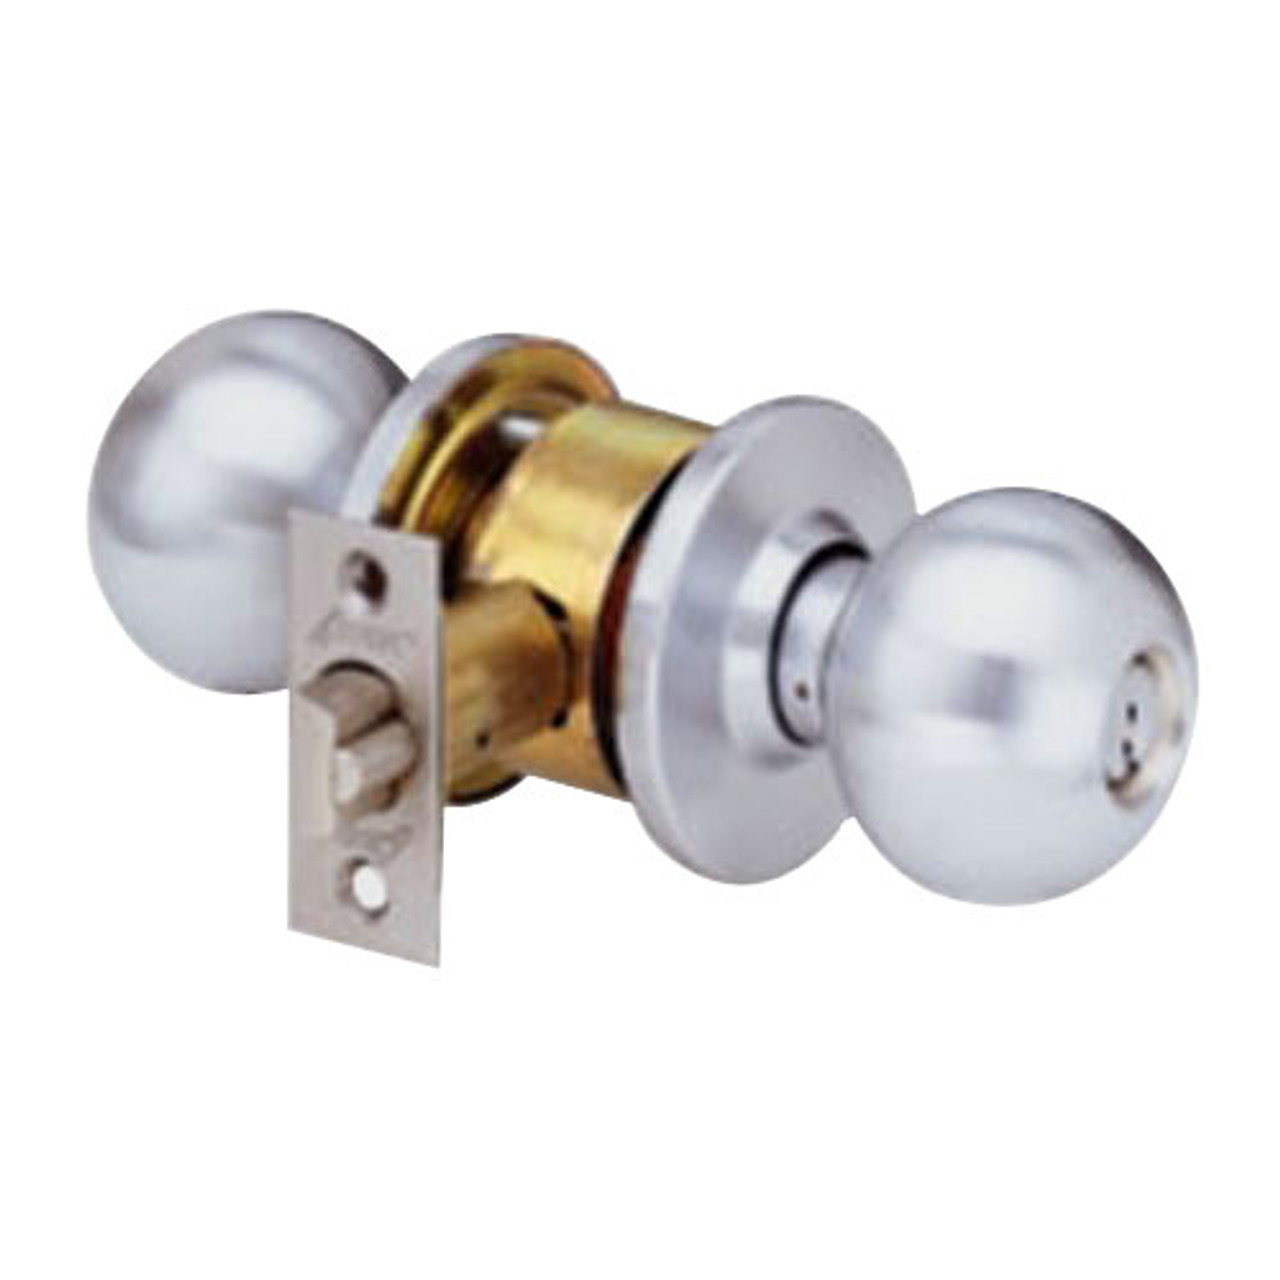 MK34-TA-26D Arrow Lock MK Series Cylindrical Locksets Double Cylinder for Exterior with TA Knob in Satin Chromium Finish